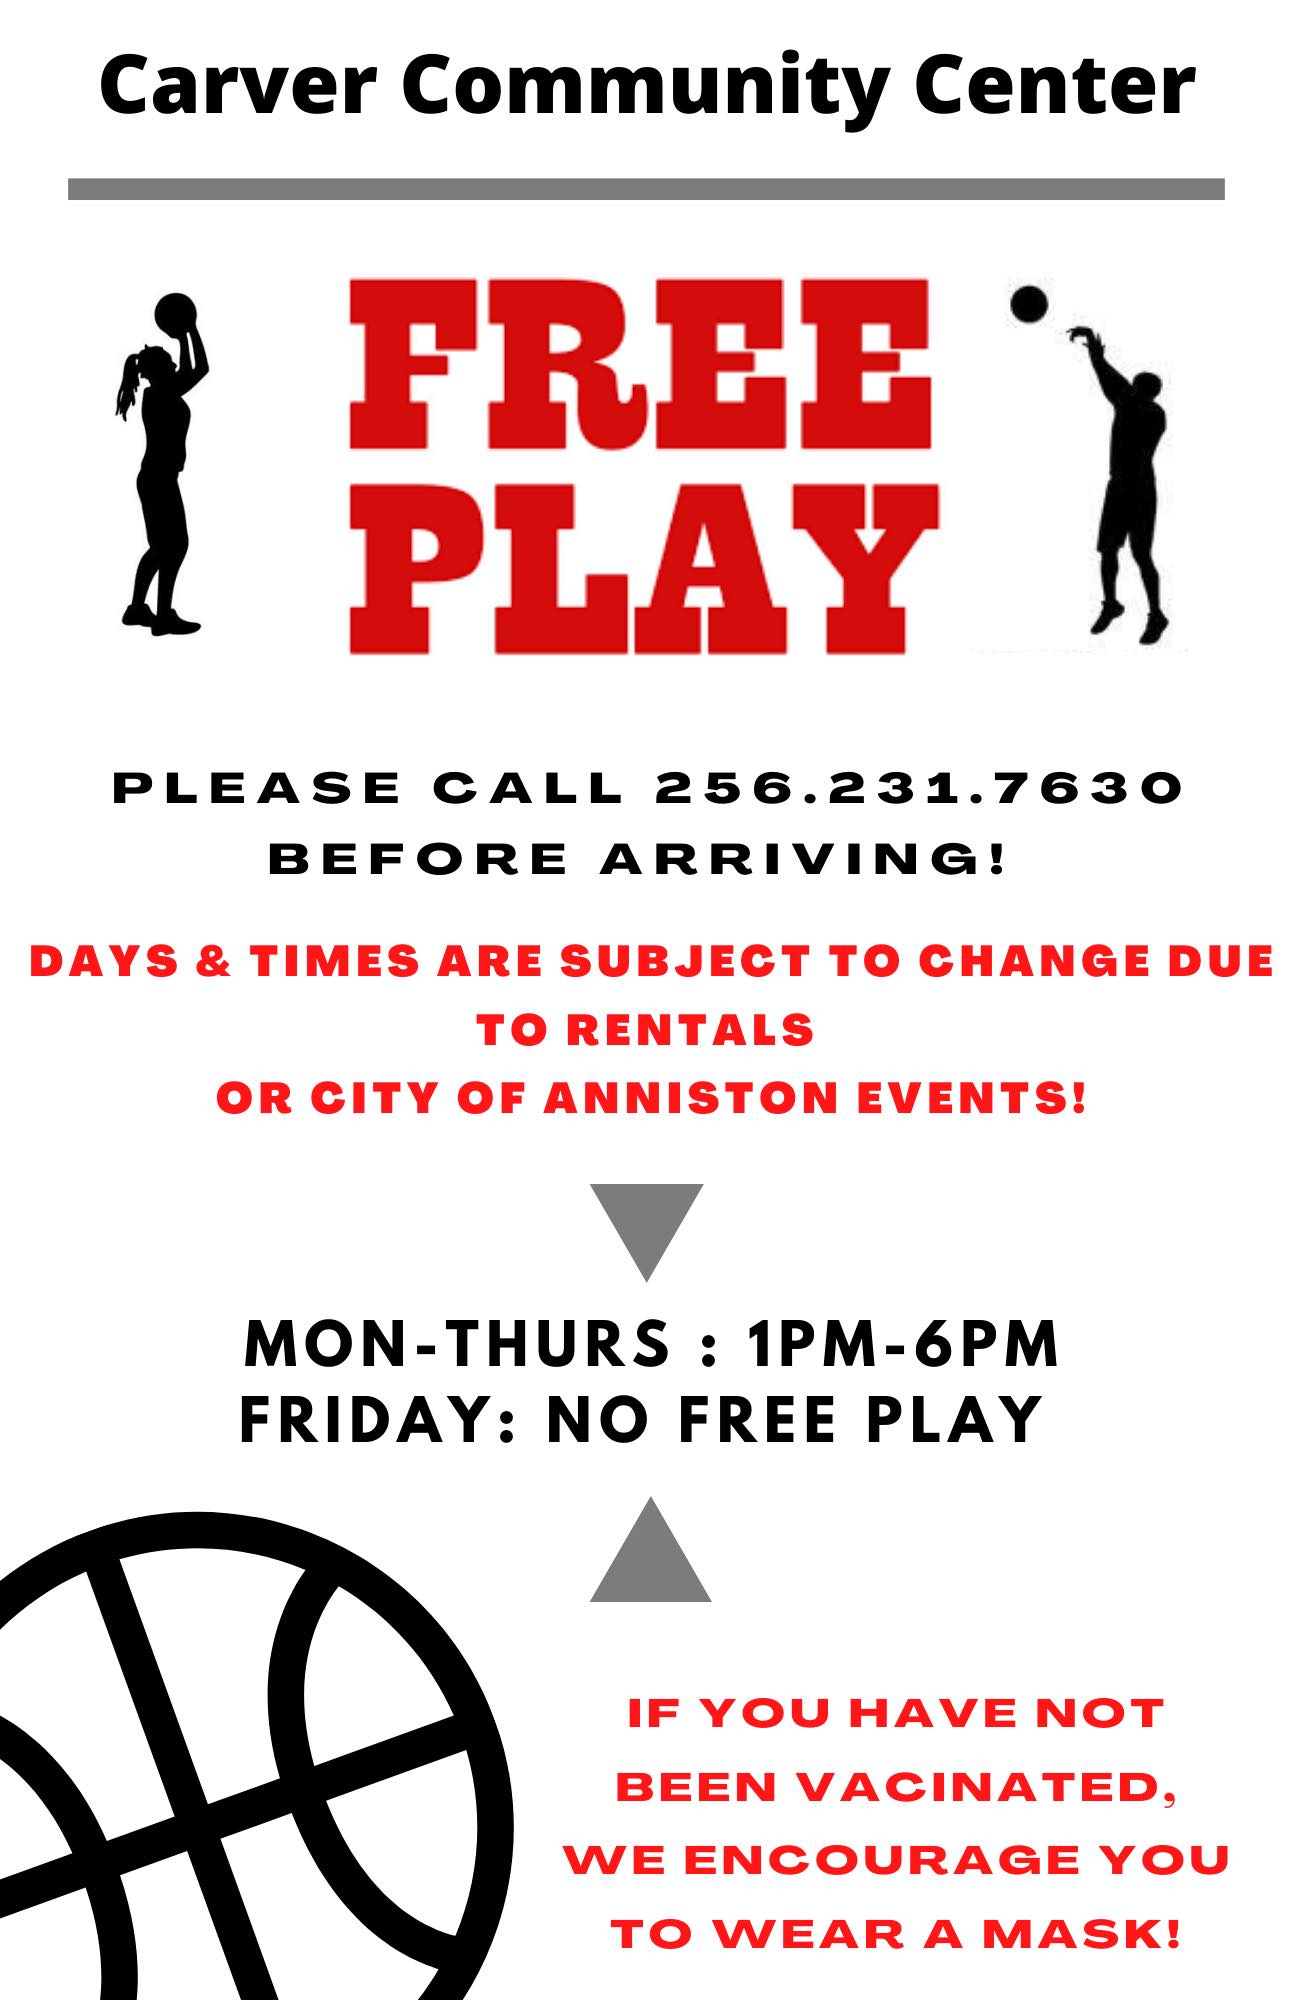 Free Play at the Carver Community Center! - The City of Anniston